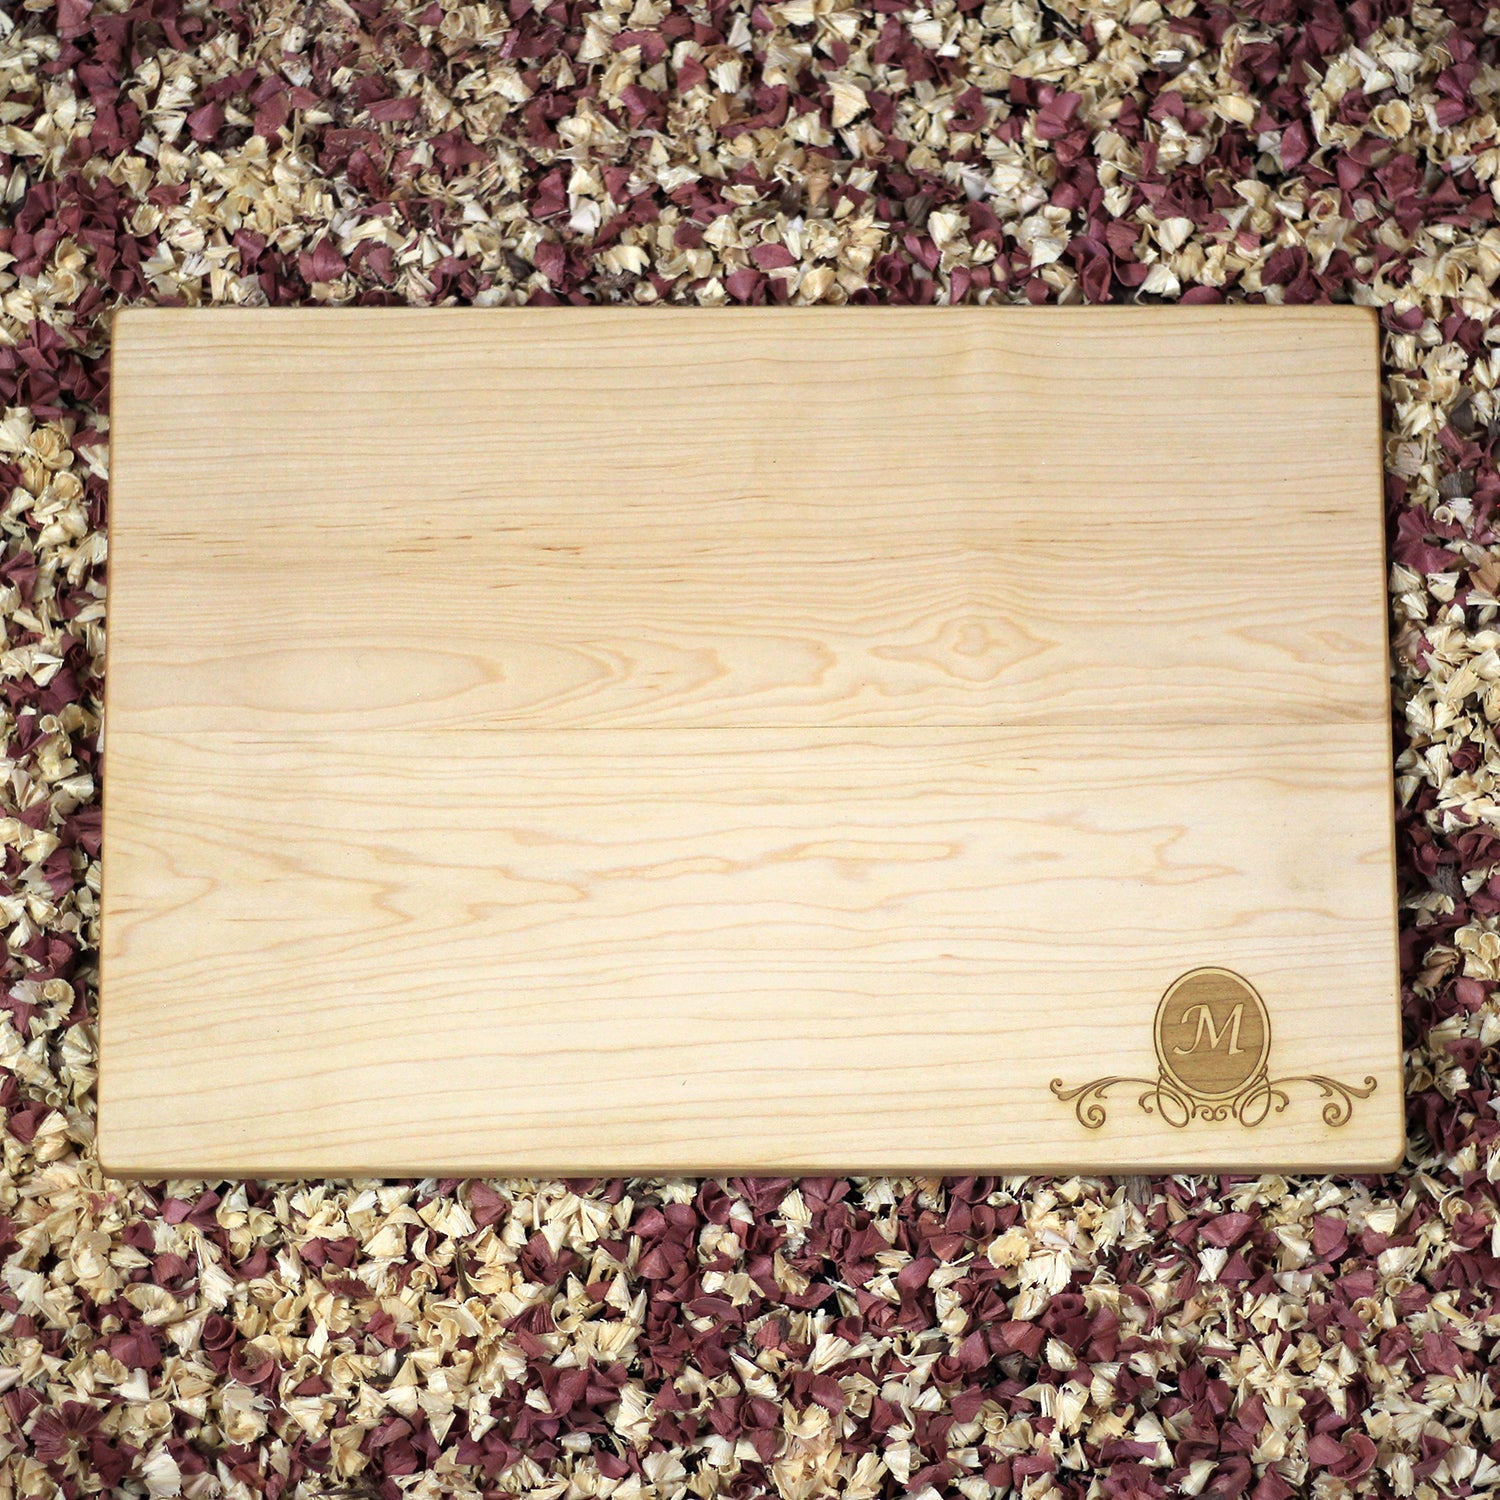 Personalized Cutting Board – Southern Makers Trading Co.